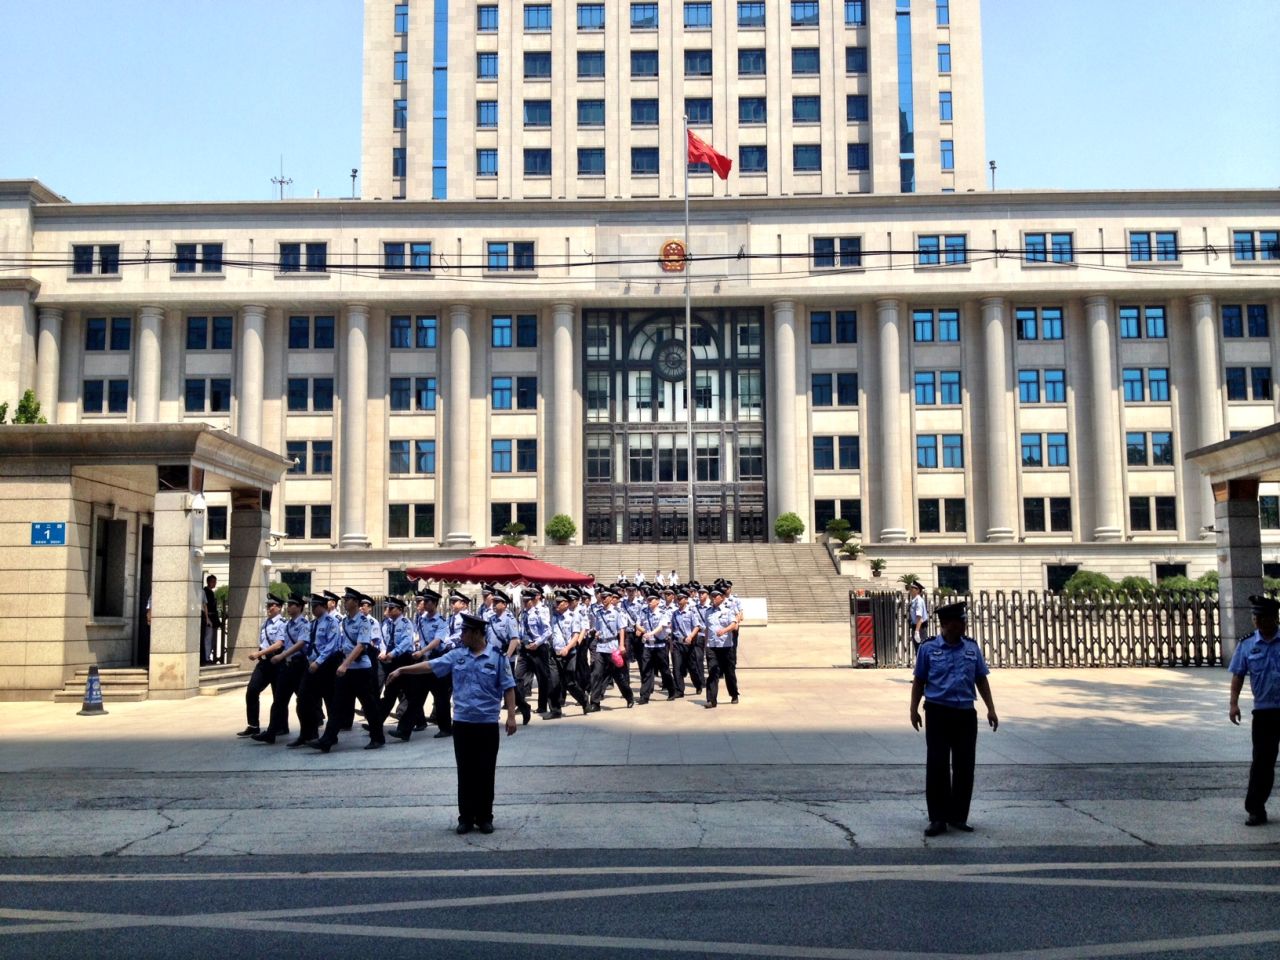 Police march outside the courthouse in Jinan on August 21.